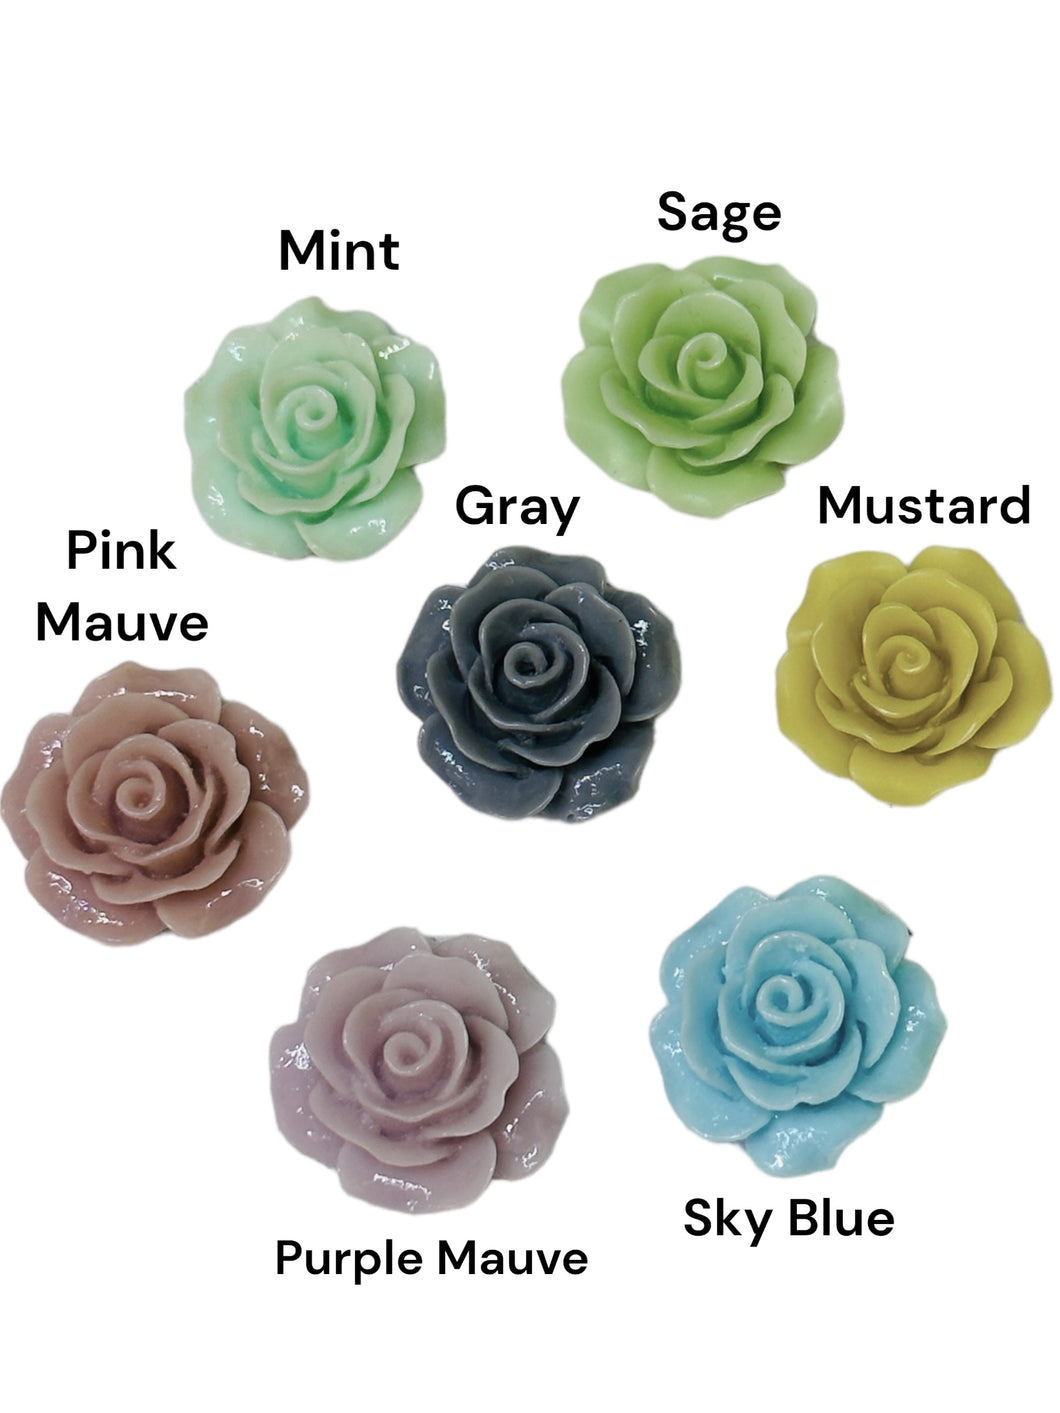 Large rose plugs pastels colors gauges for gauged or stretched ears: Sizes 8g, 6g, 4g, 2g, 1g, 0g, 11/32